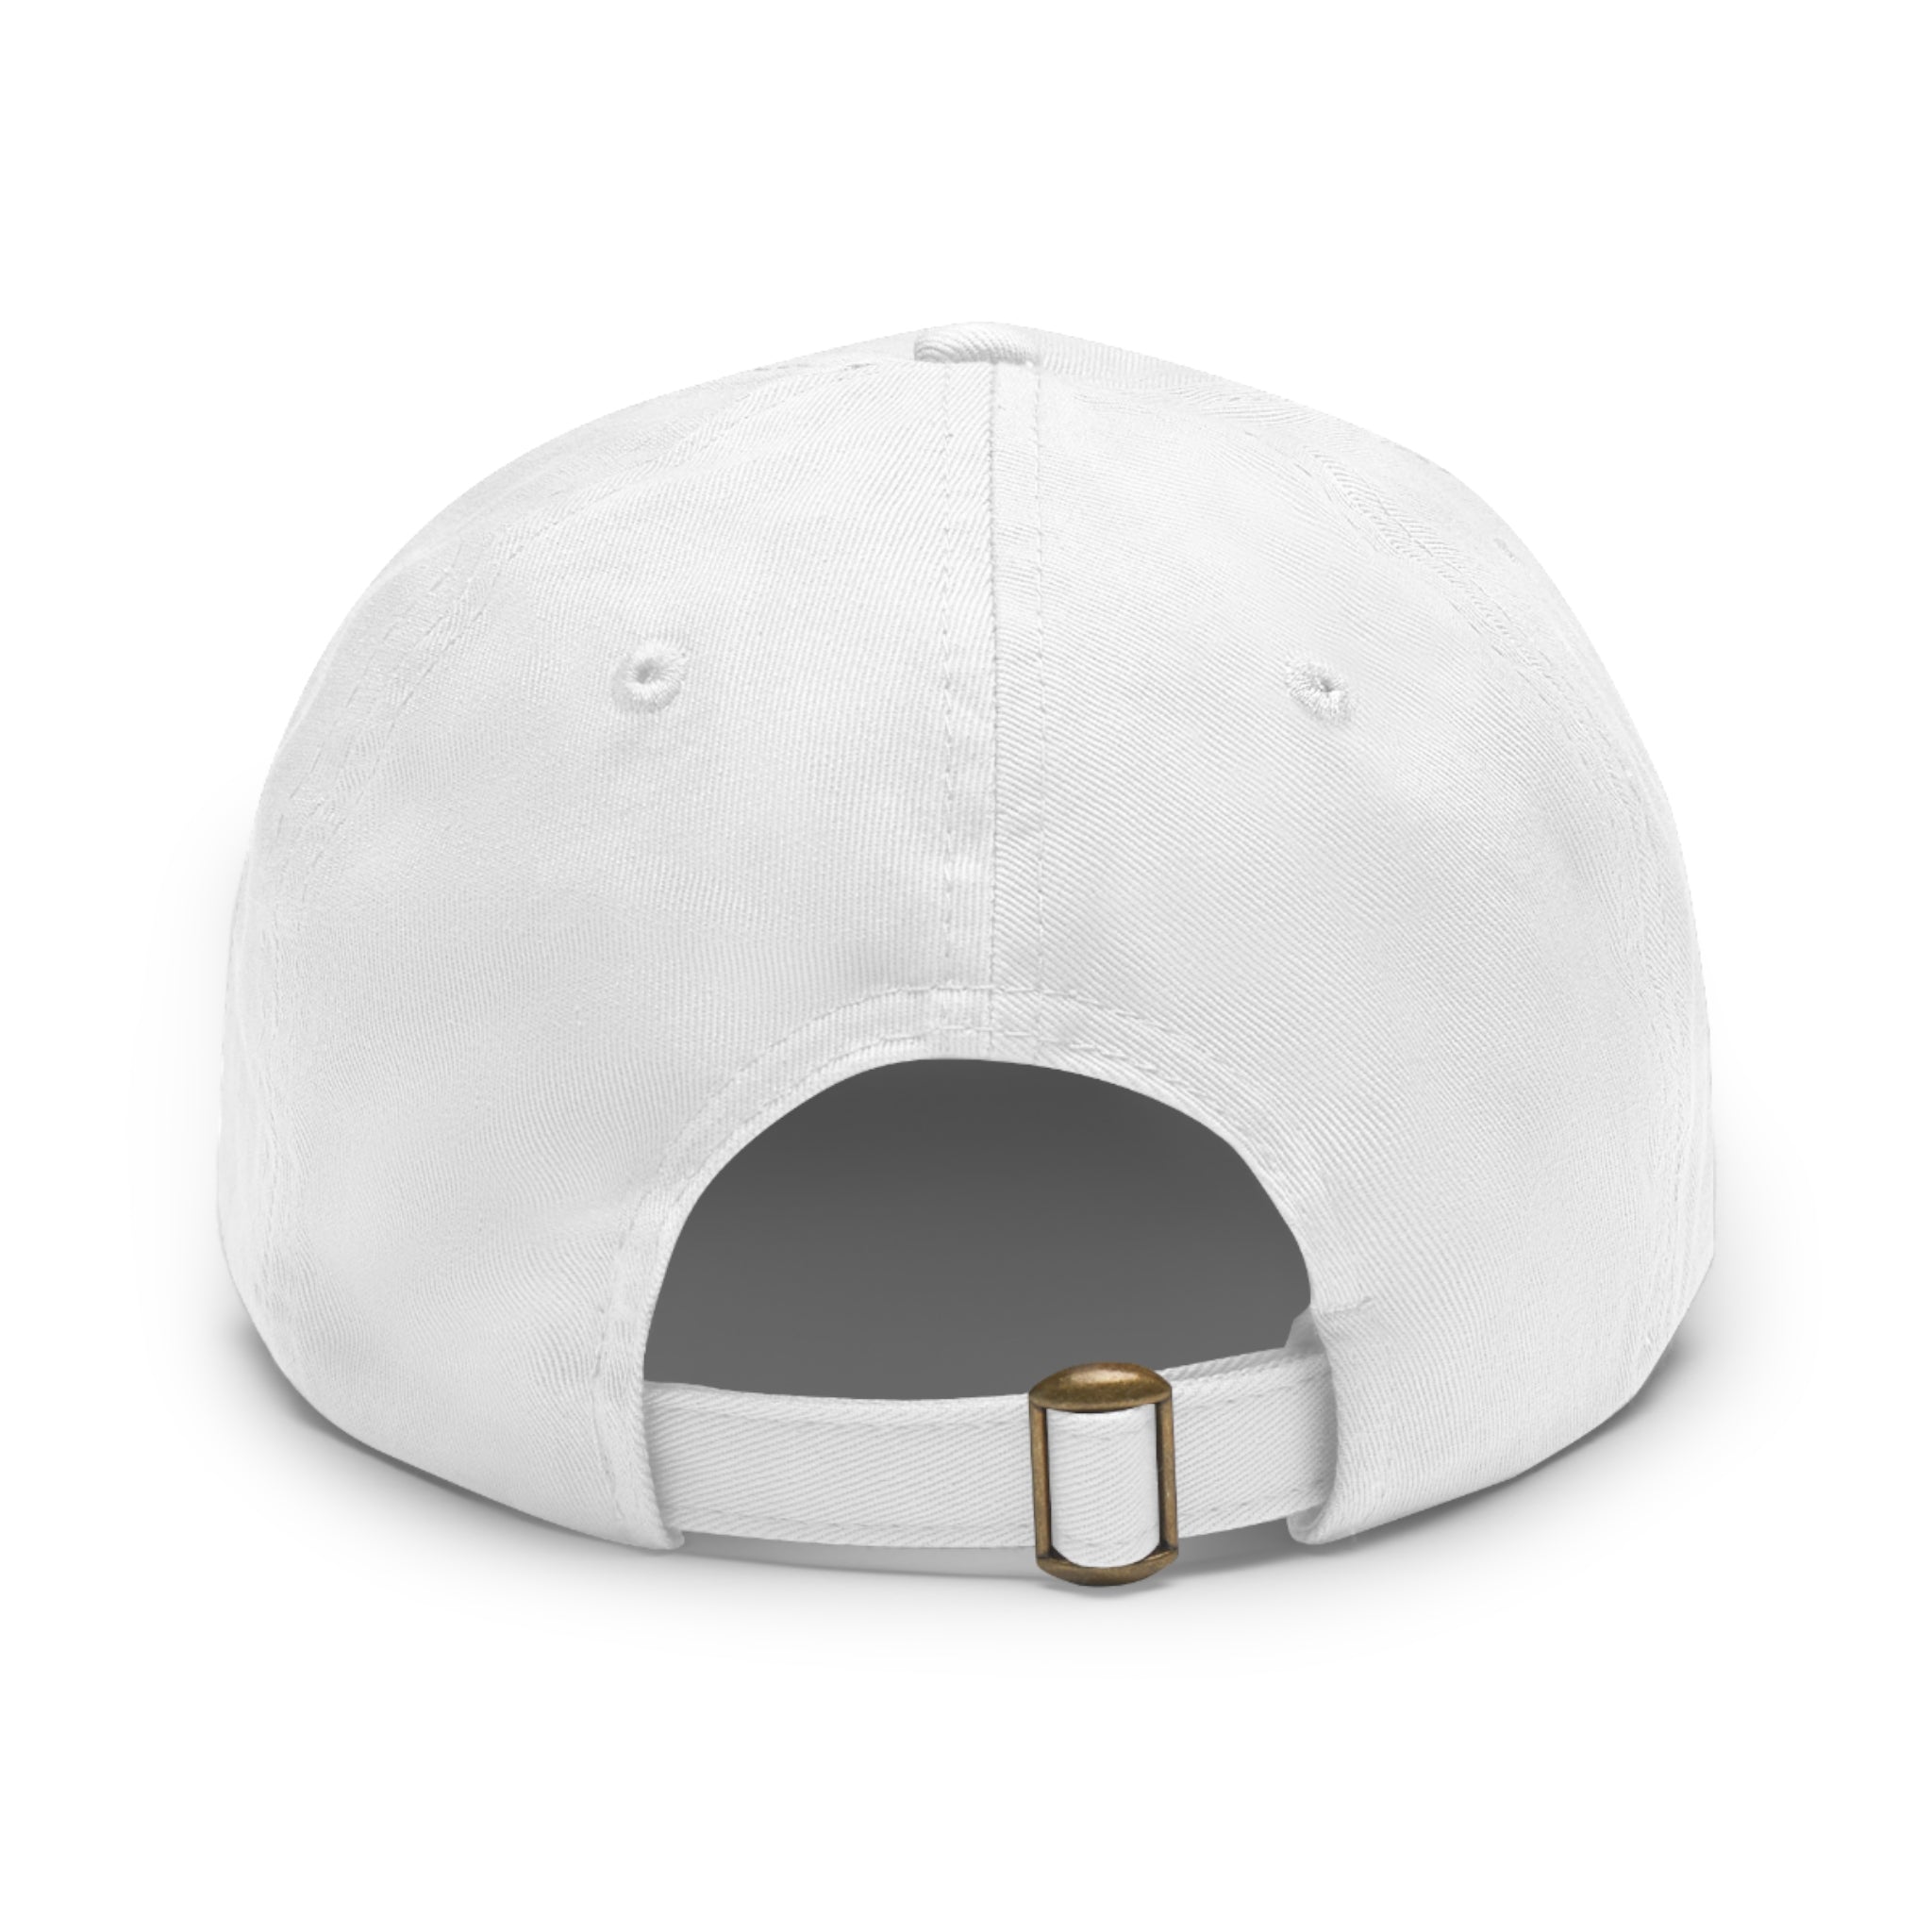 Apollo Moda White & Brown Dad Hat with Leather Patch (Rectangle)